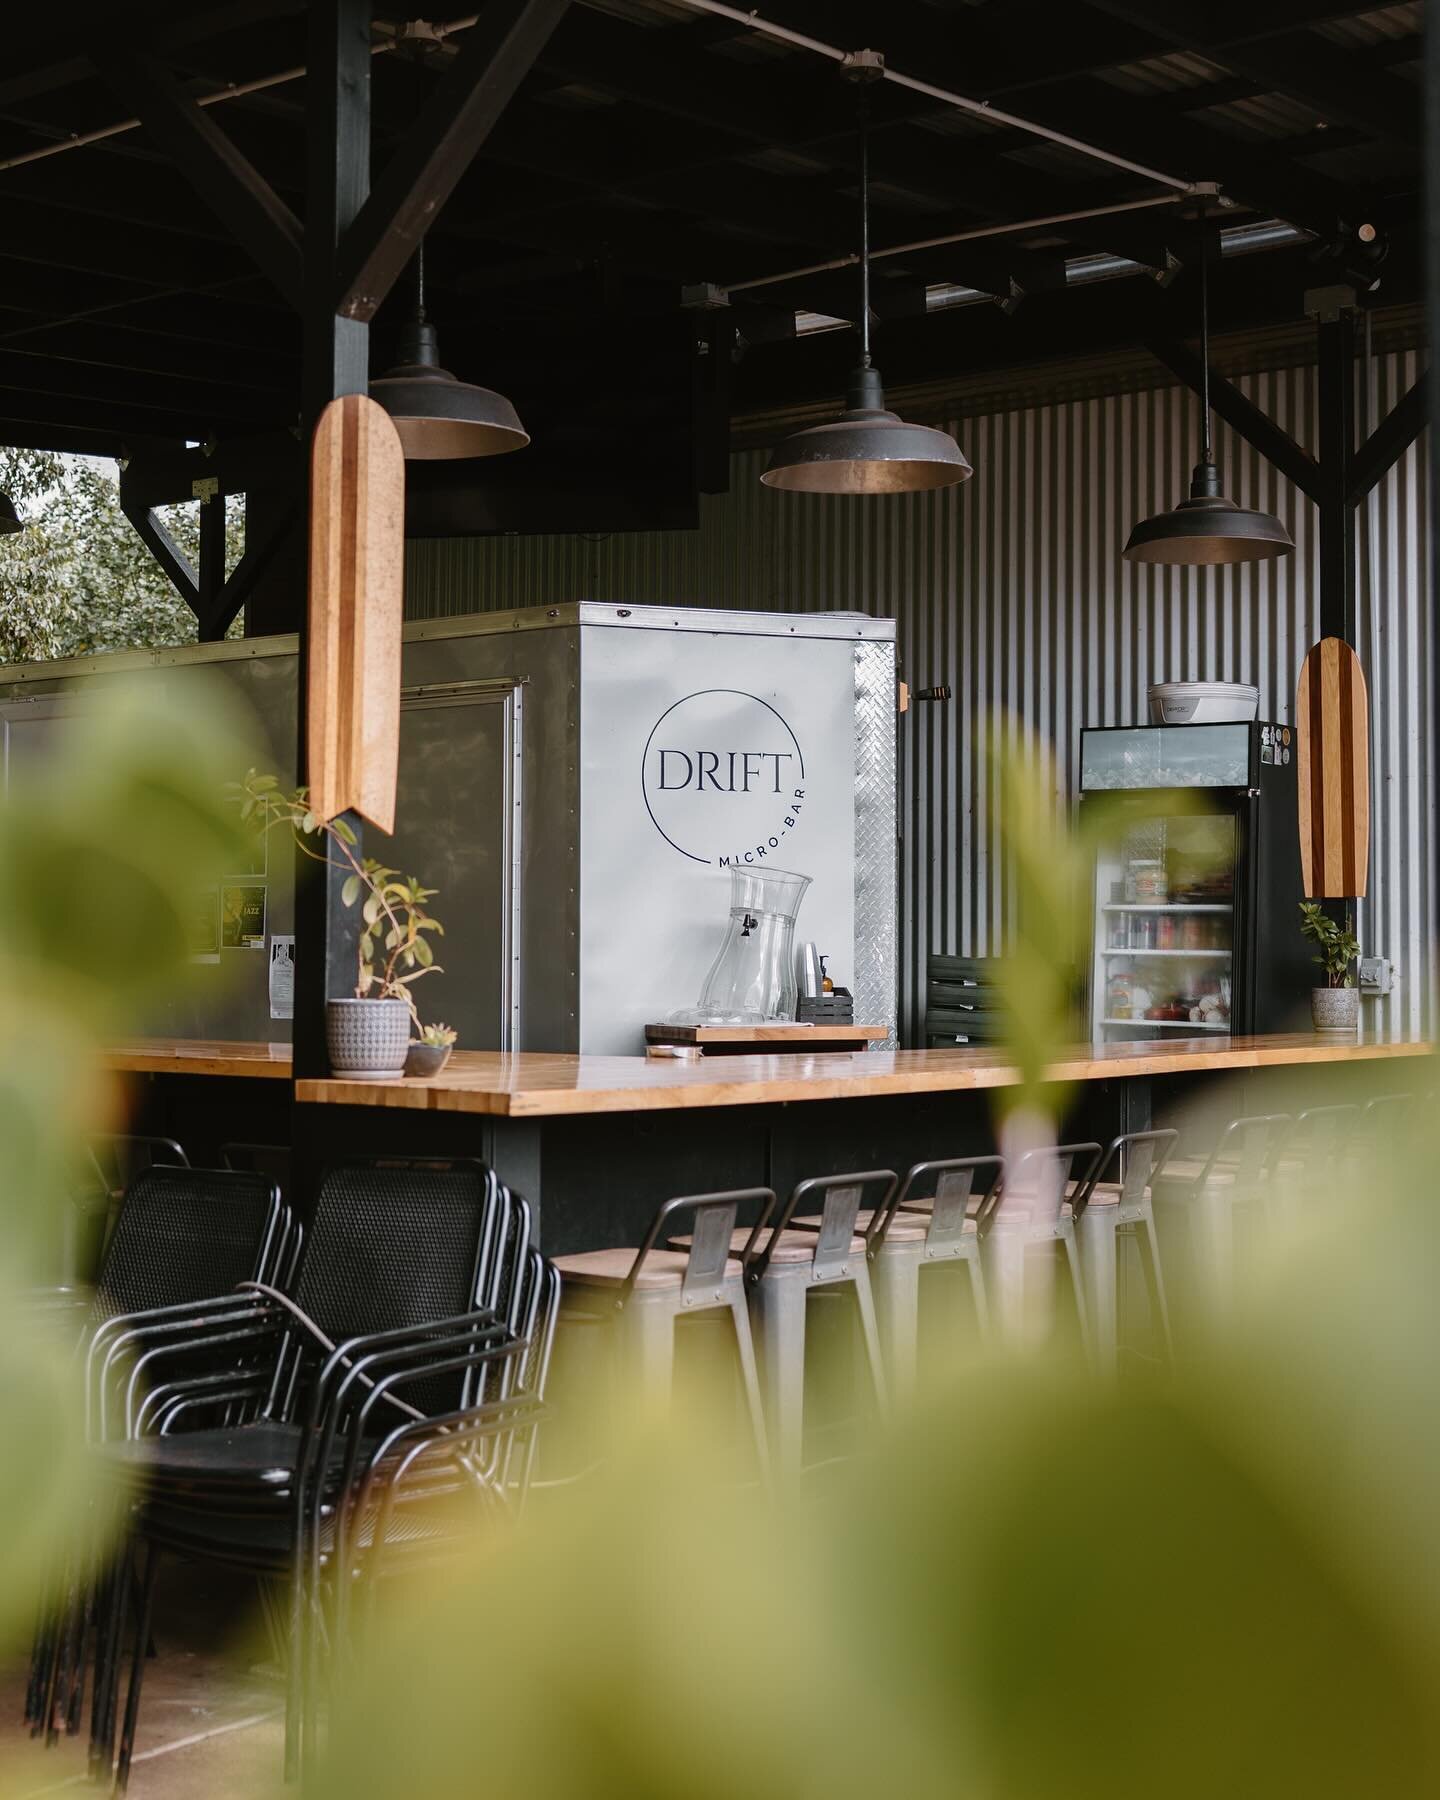 Have you stopped by @drift_kauai yet? It&rsquo;s the coolest micro-bar located on the back side of the warehouse. Open Tuesday-Saturday from 12pm-8pm with Happy Hour every day at 4pm. Enjoy a fun night out with friends to experience all that Drift ha